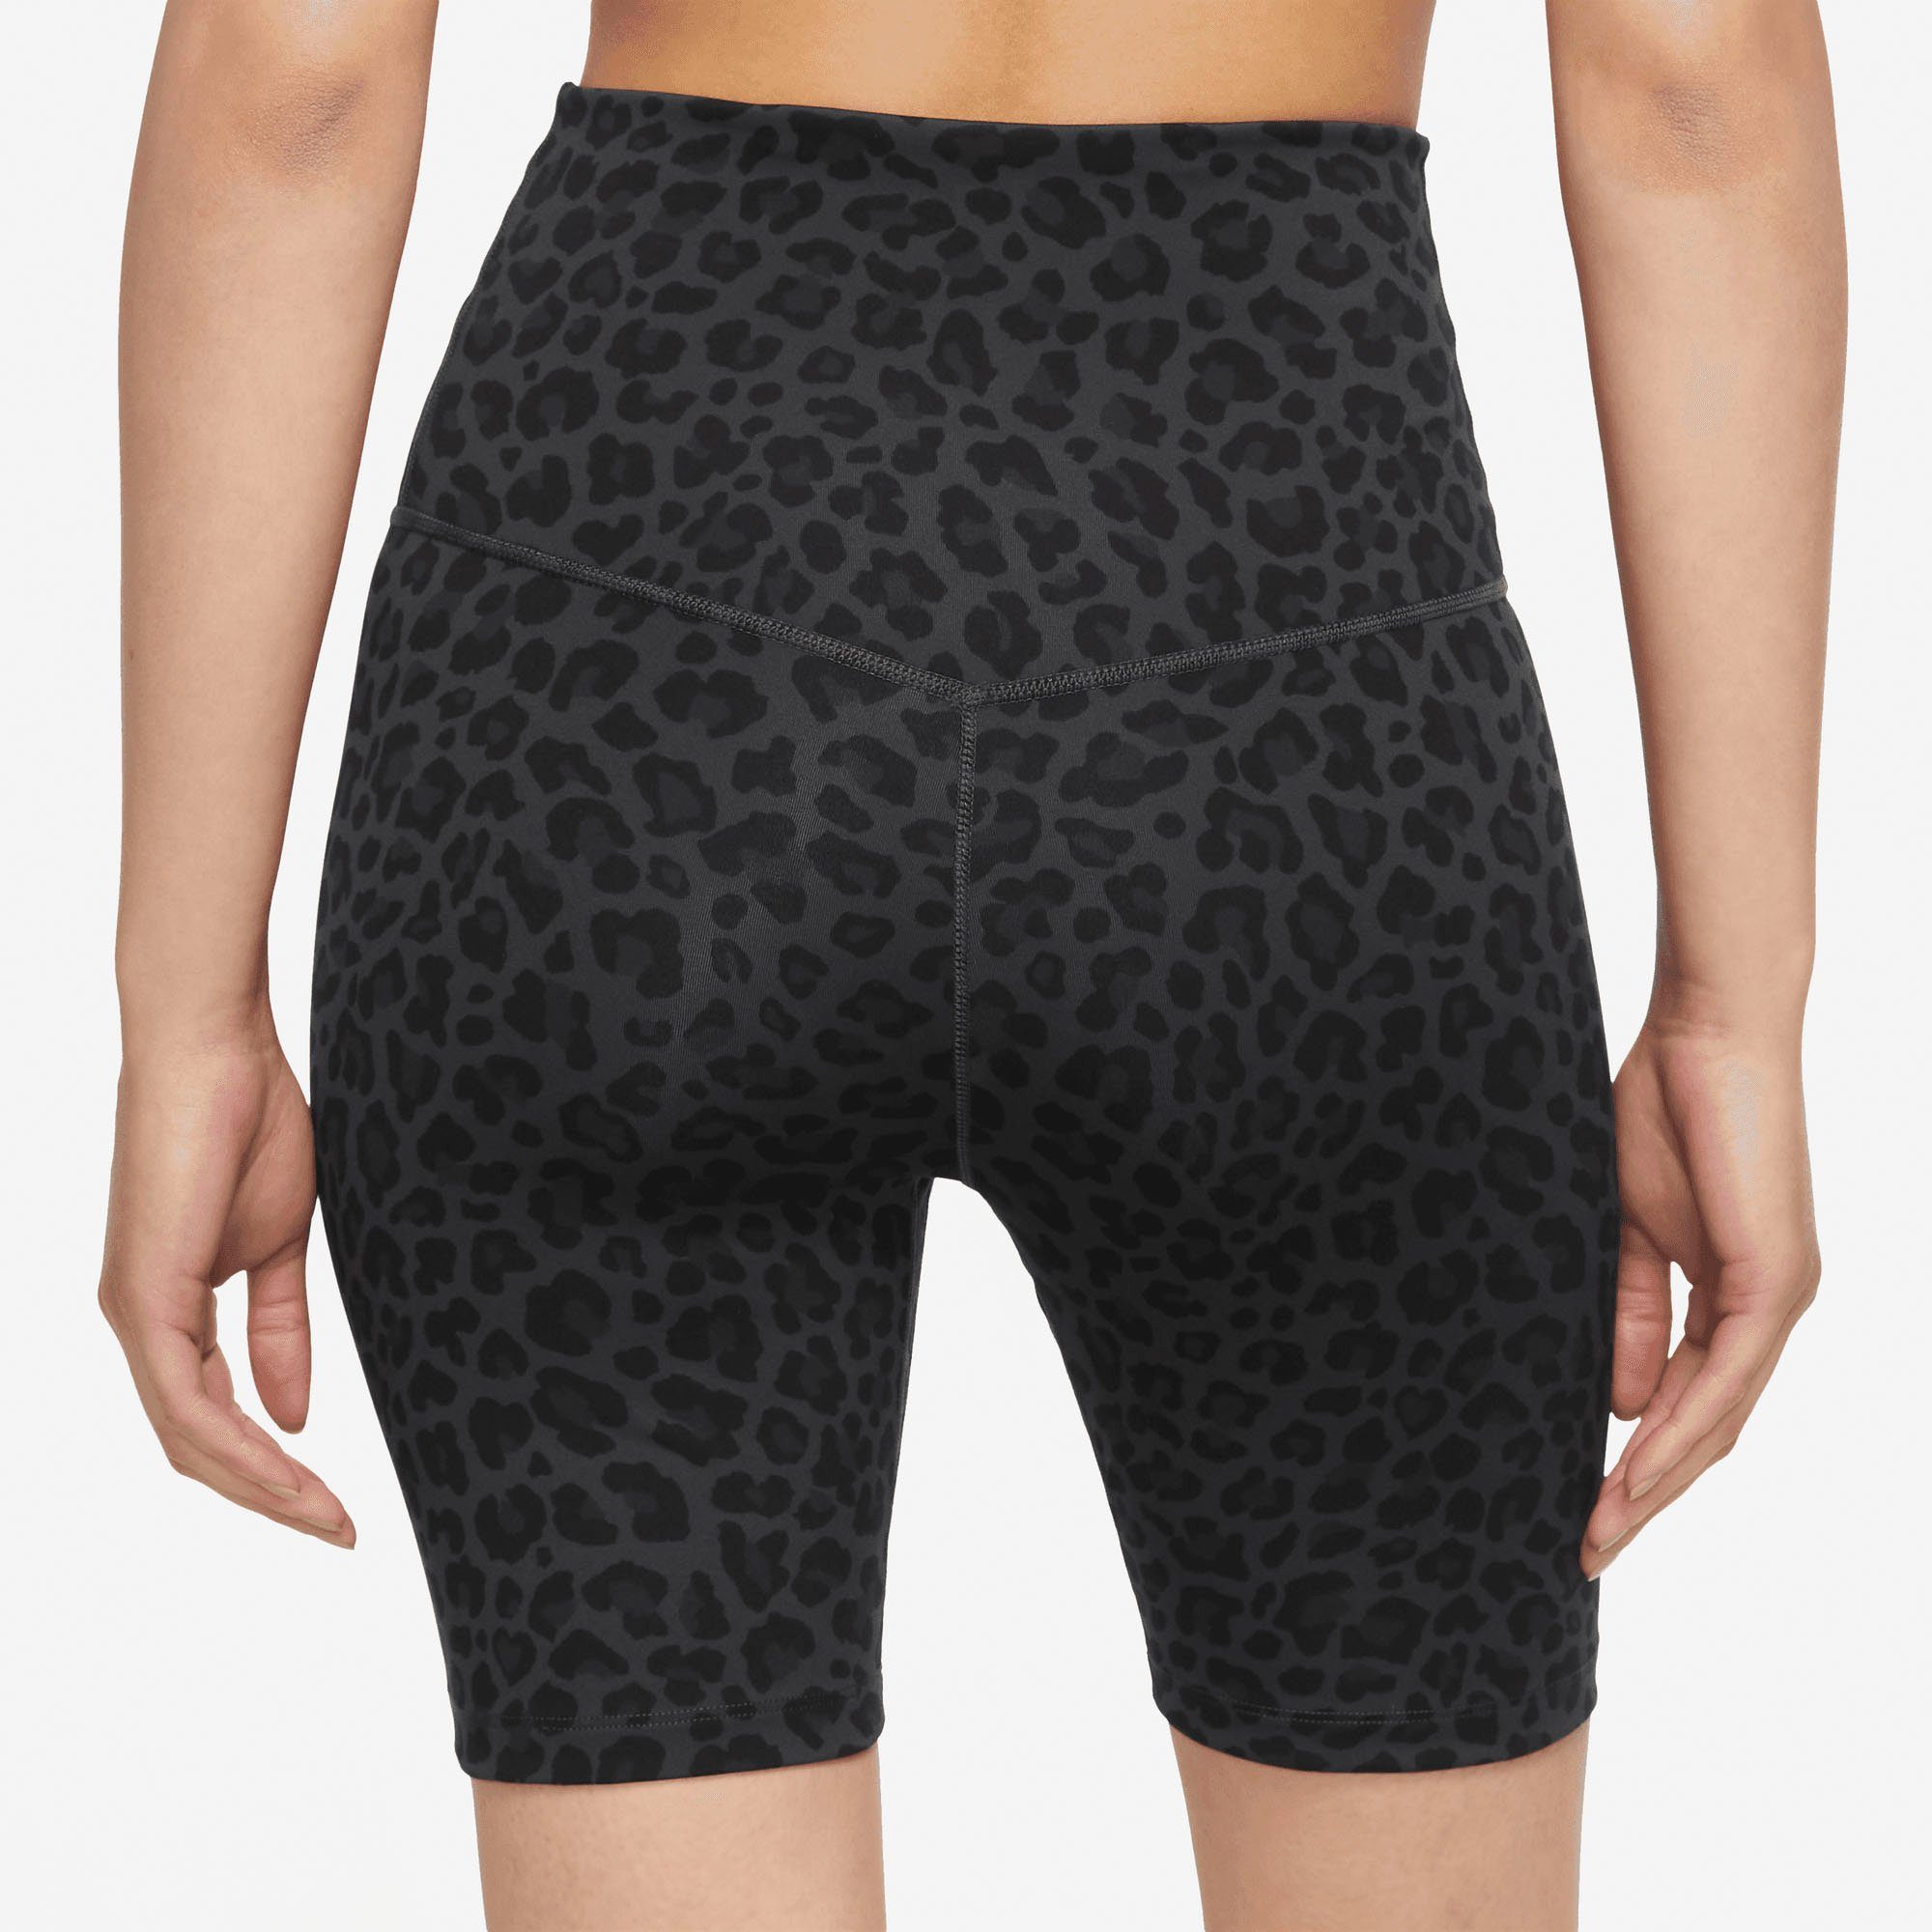 Nike Trainingsshorts One Dri-FIT Women's -Inch All-Over Leopard Print Shorts